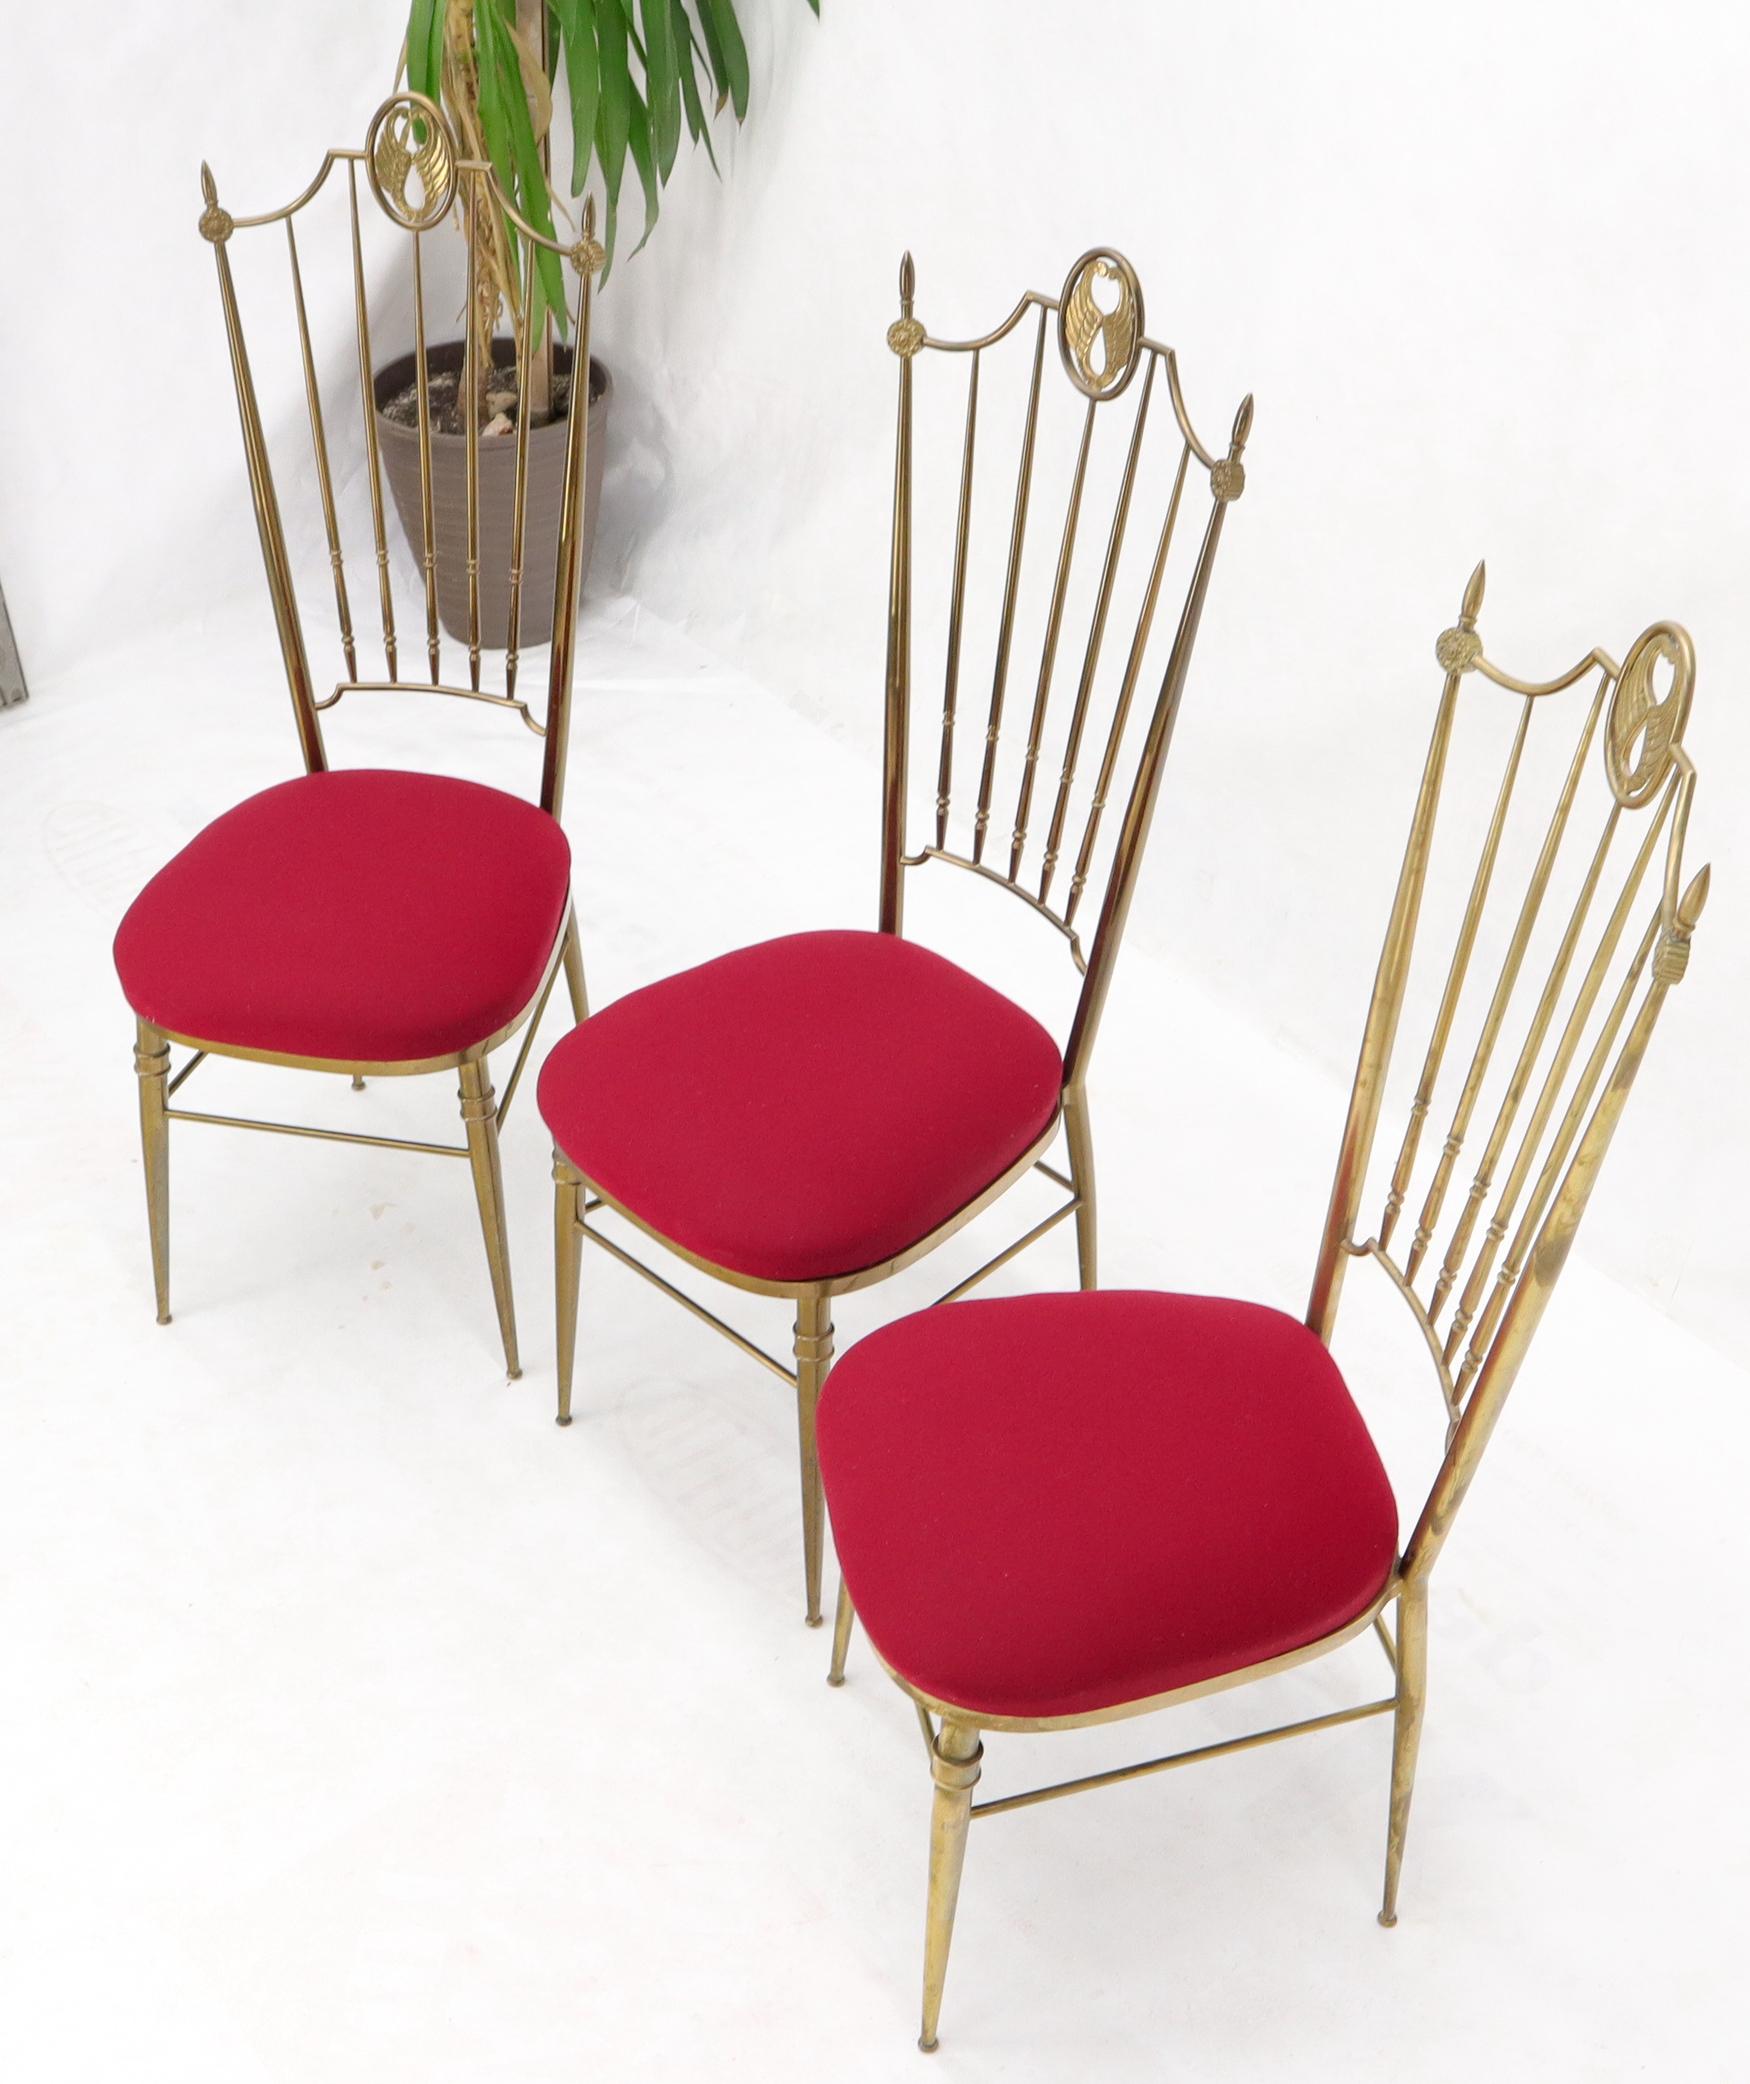 Set of 3 Italian Solid Brass Chiavari Chairs From 1950s New Upholstery In Good Condition For Sale In Rockaway, NJ